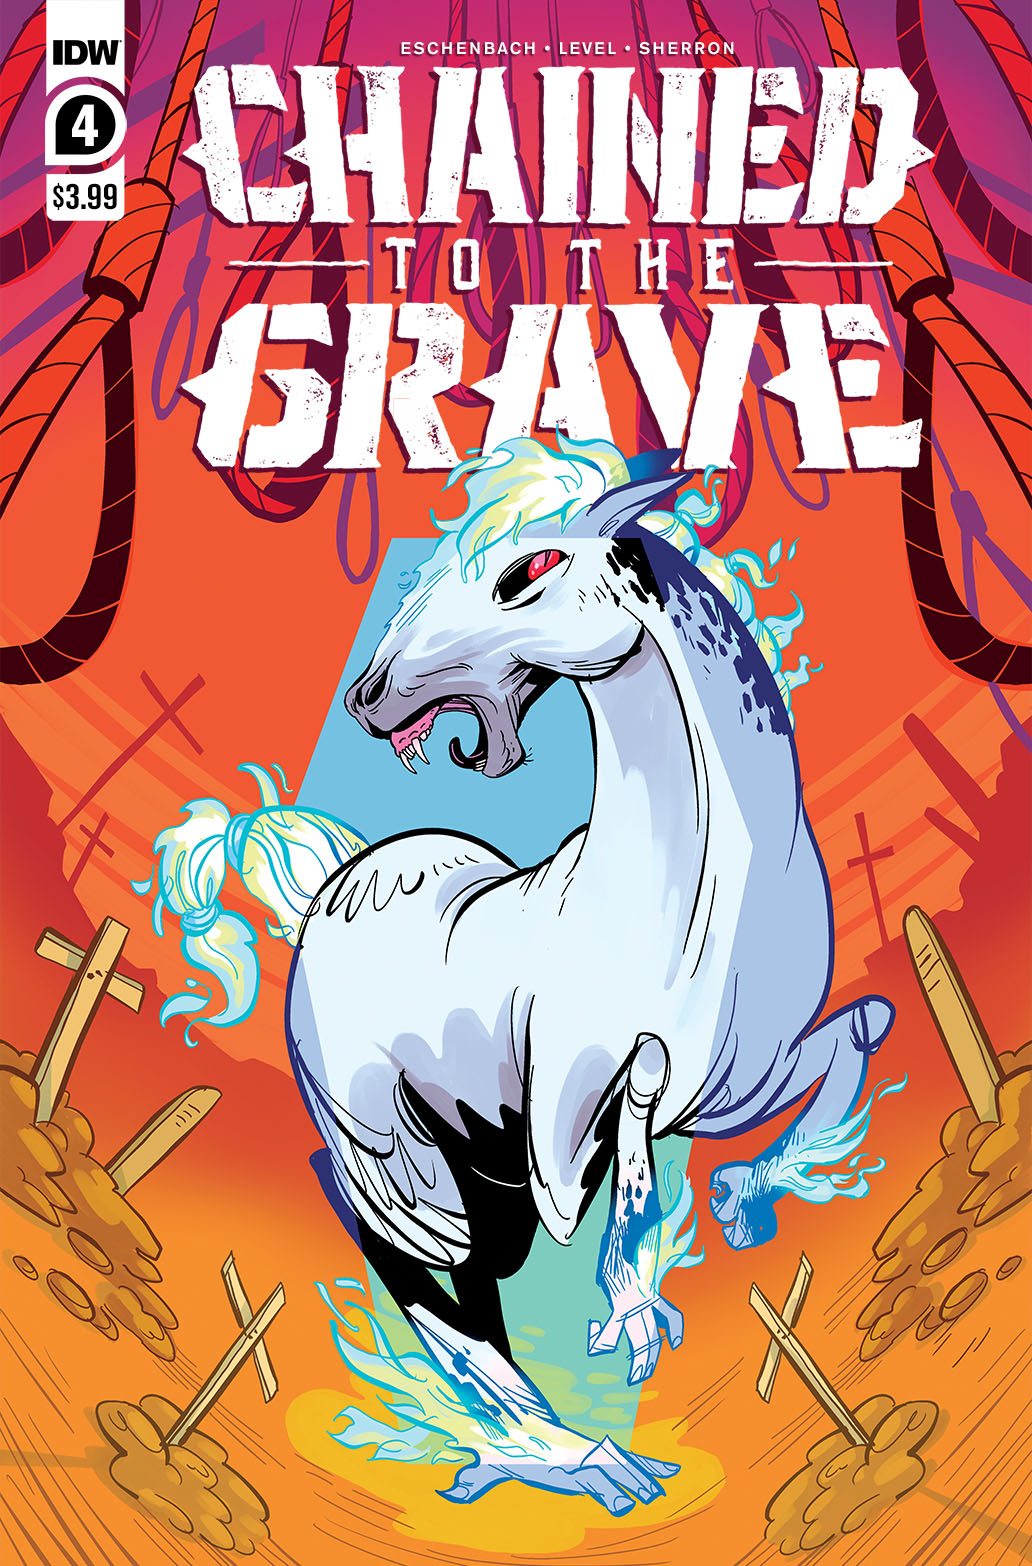 Chained To The Grave #4 Cover A Sherron (Of 5)